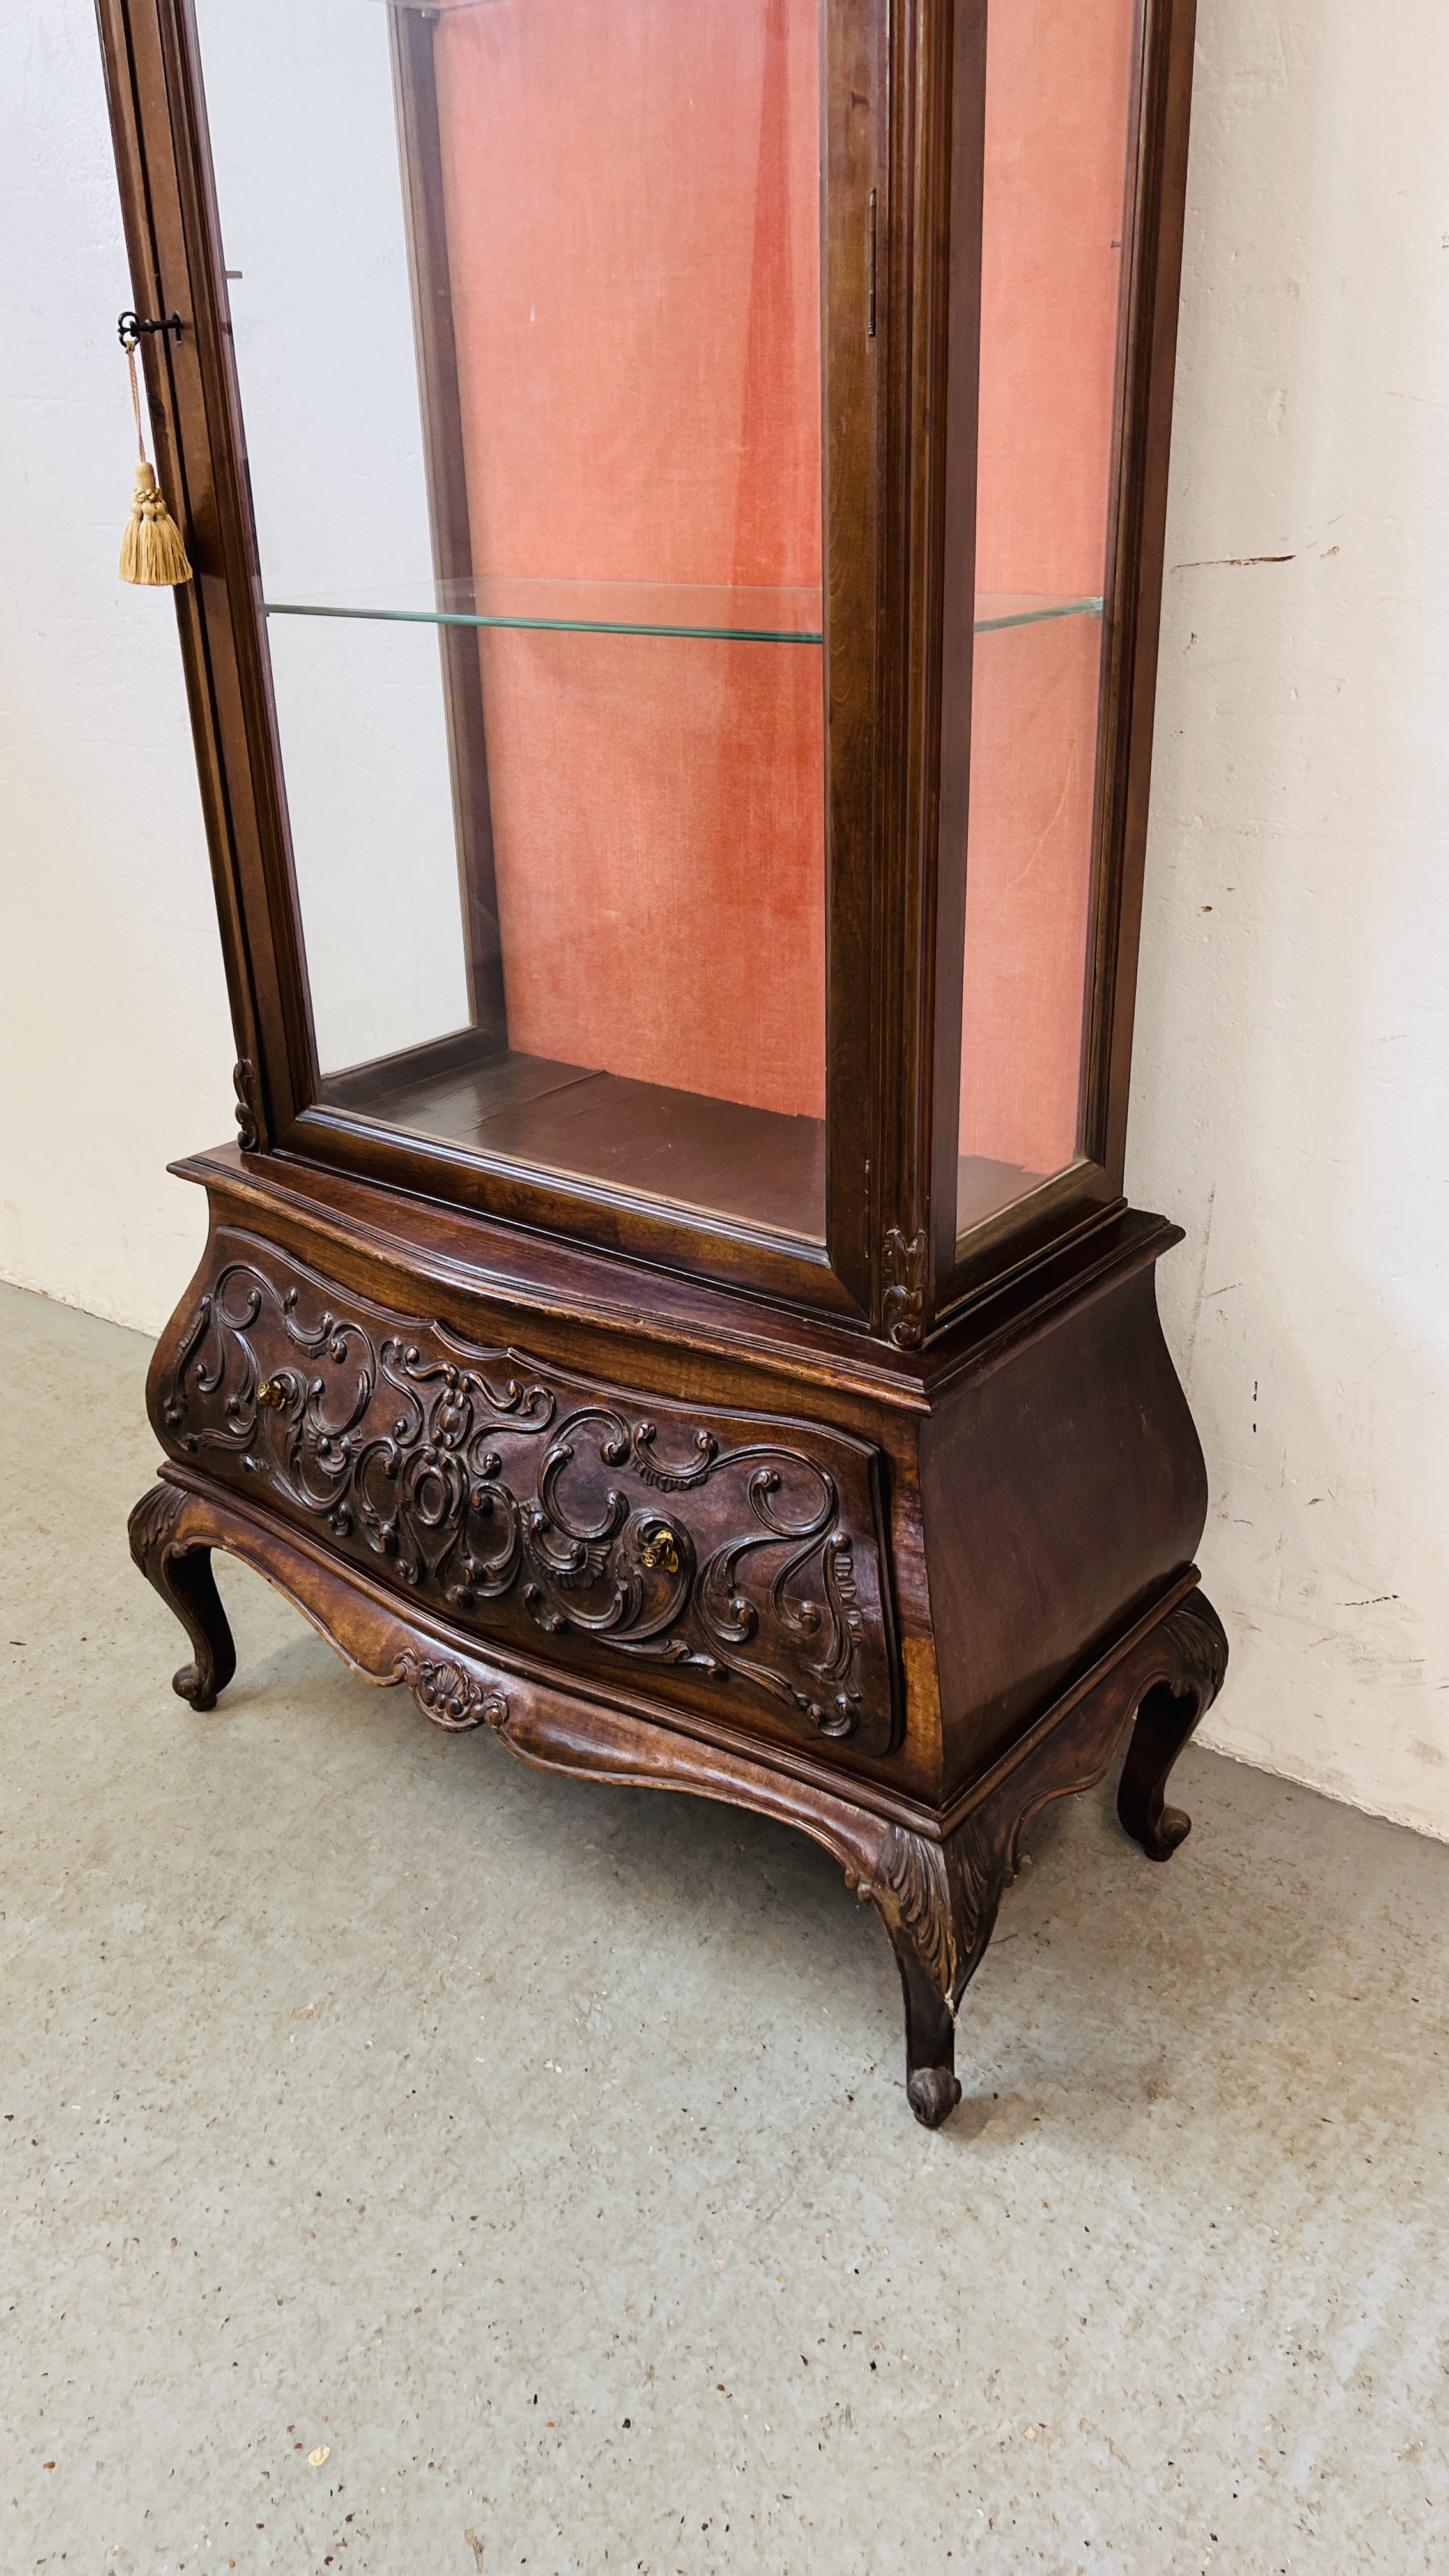 A REPRODUCTION CONTINENTAL STYLE DISPLAY CABINET WITH DRAWER TO BASE - W 83CM. D 41CM. H 183CM. - Image 3 of 9